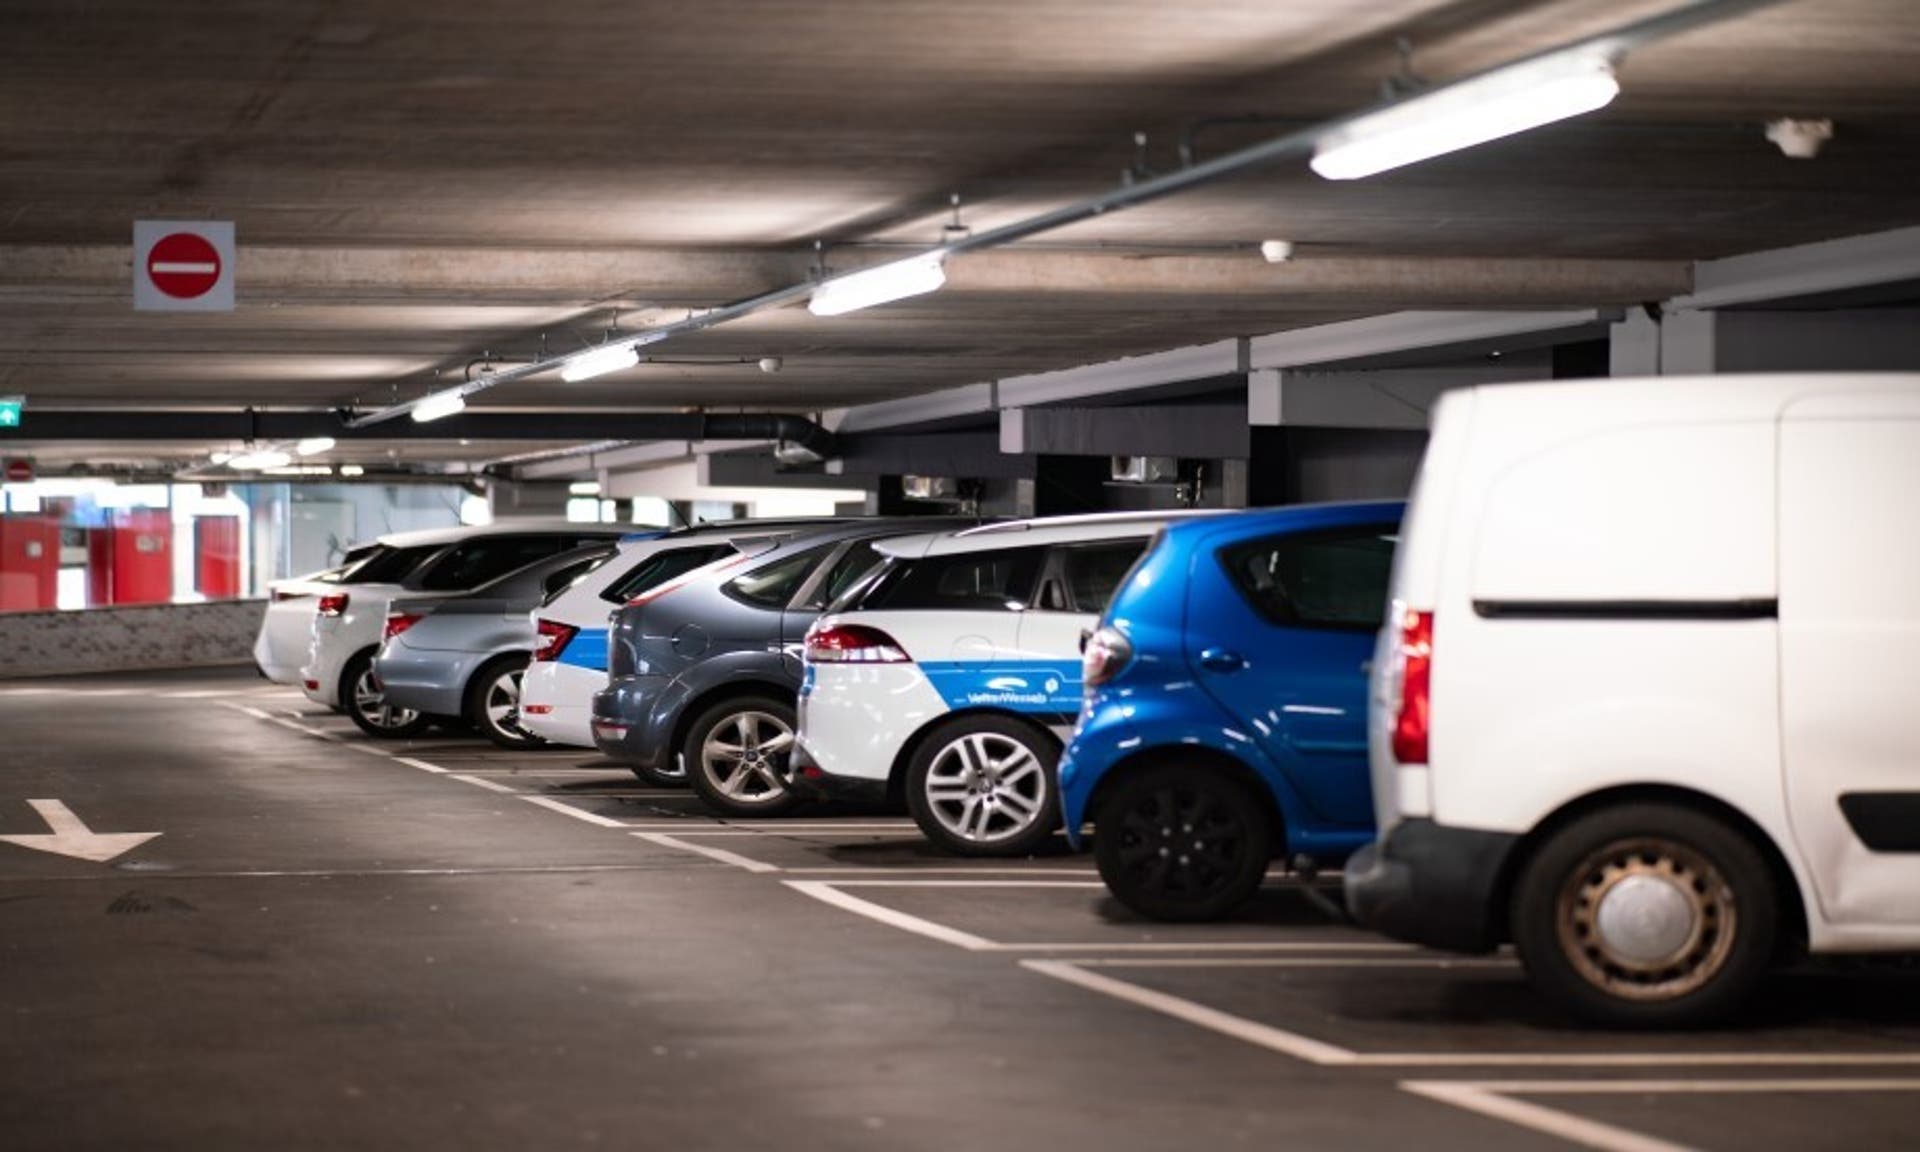  image of an airport car park, with cars parked in a row 